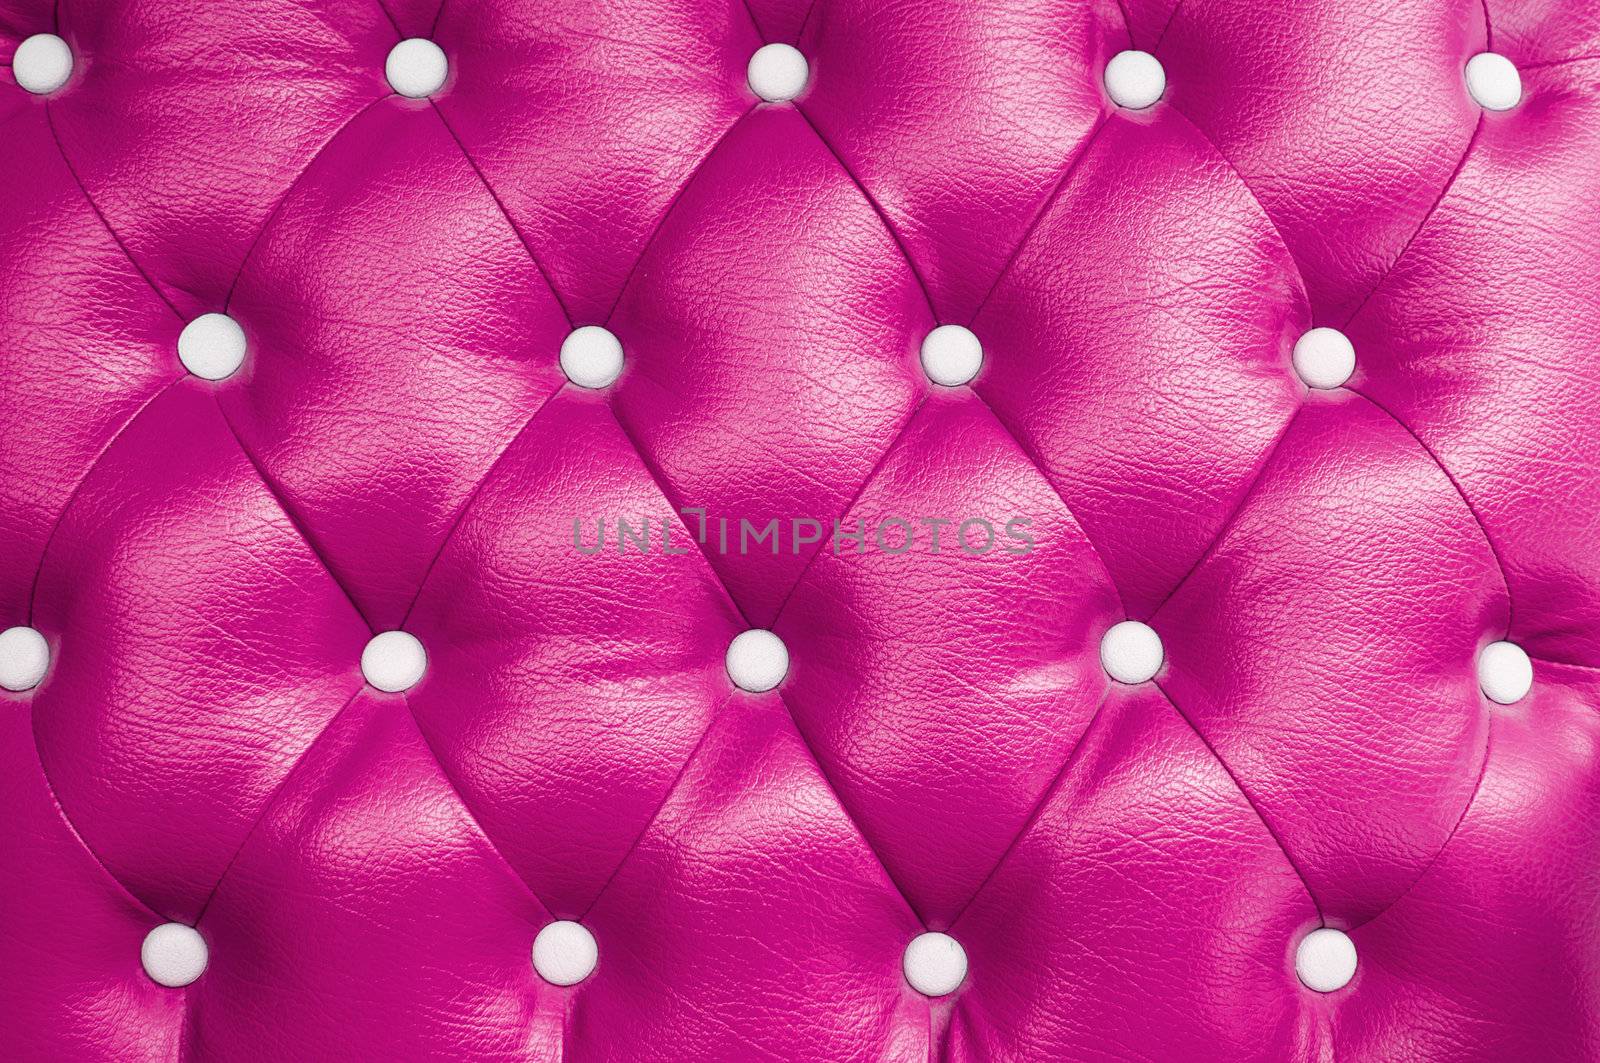 picture of pink genuine leather upholstery by TanawatPontchour